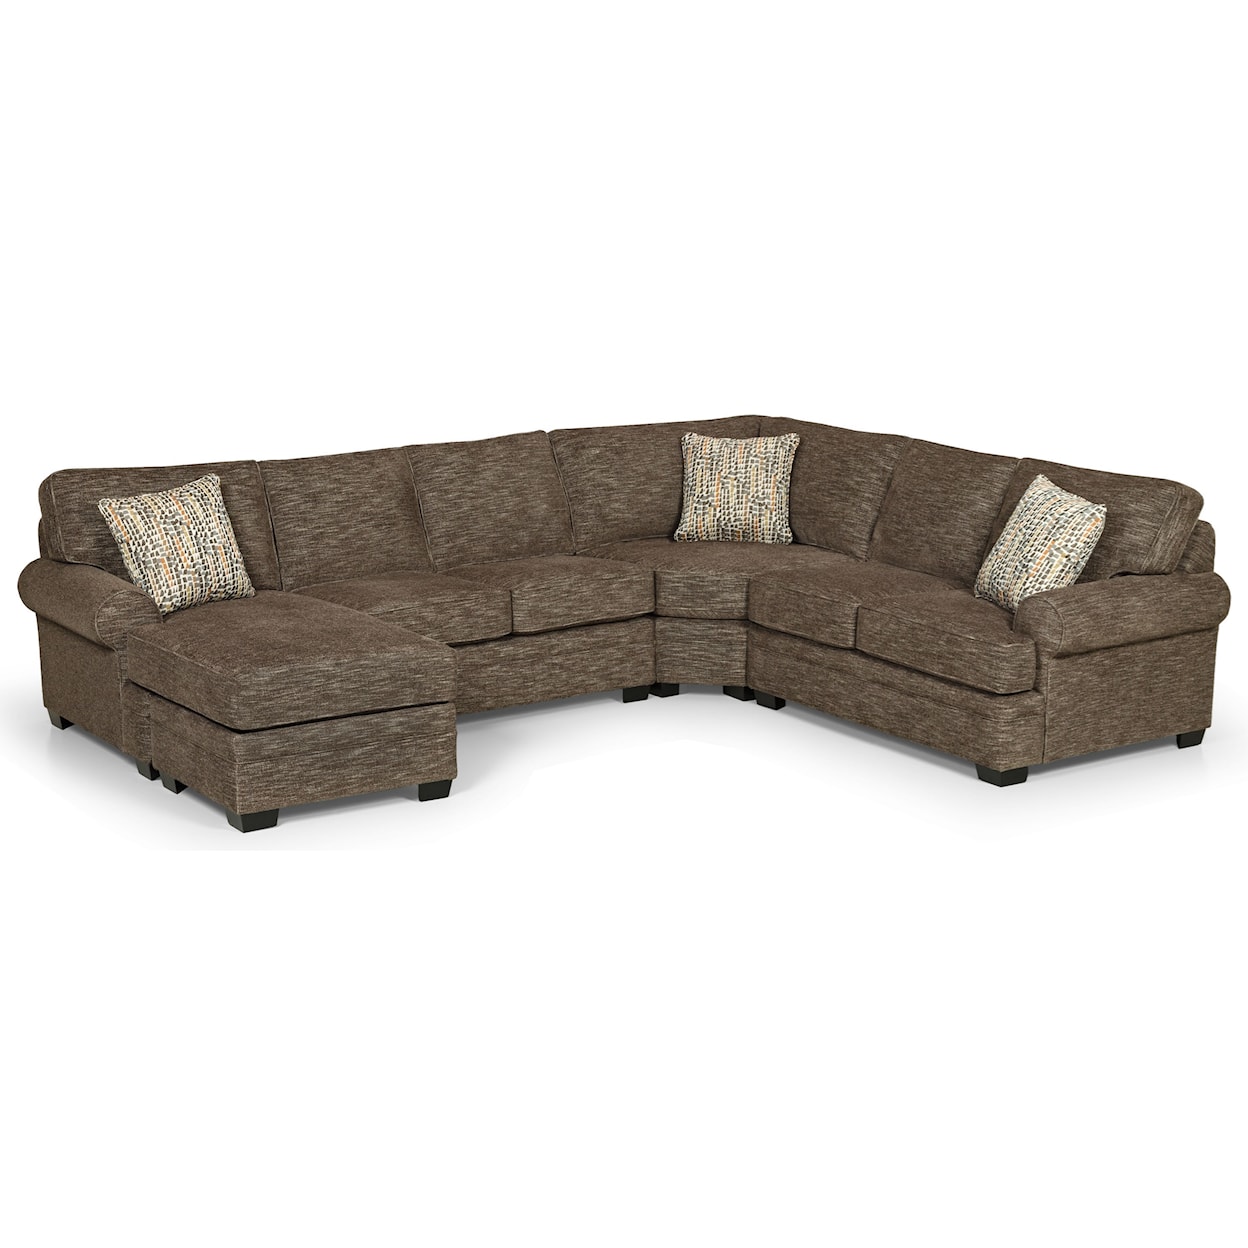 Sunset Home 422 5 Seat Sectional Sofa